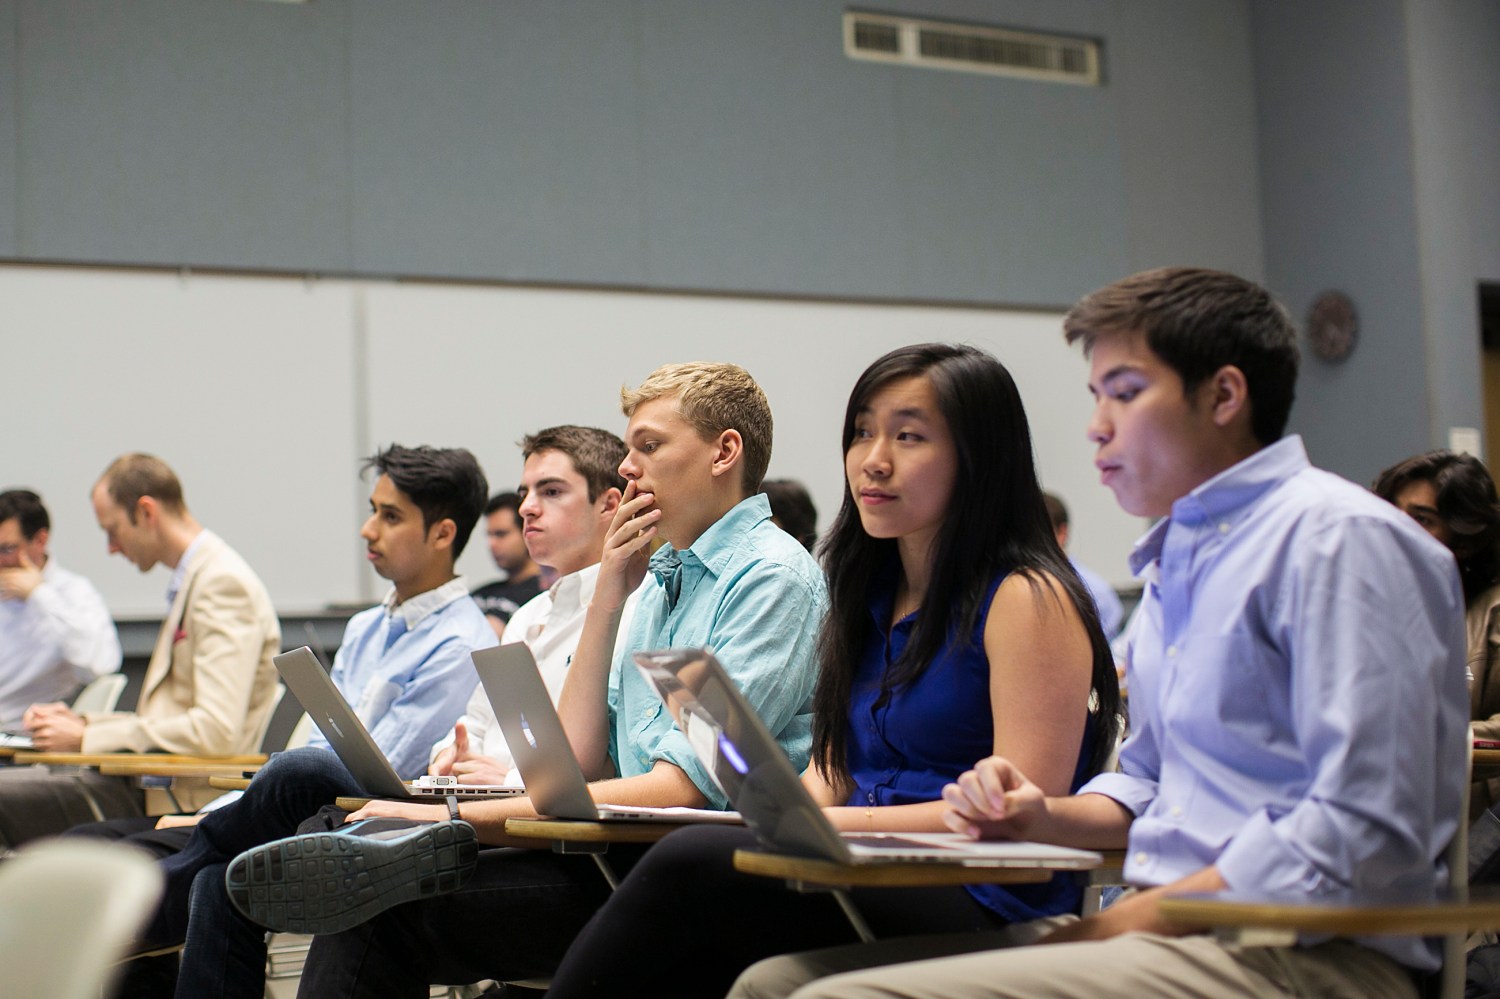 Stanford University students listen while classmates make a presentation to a group of visiting venture capitalists during their Technology Entrepreneurship class in Stanford, California March 11, 2014.